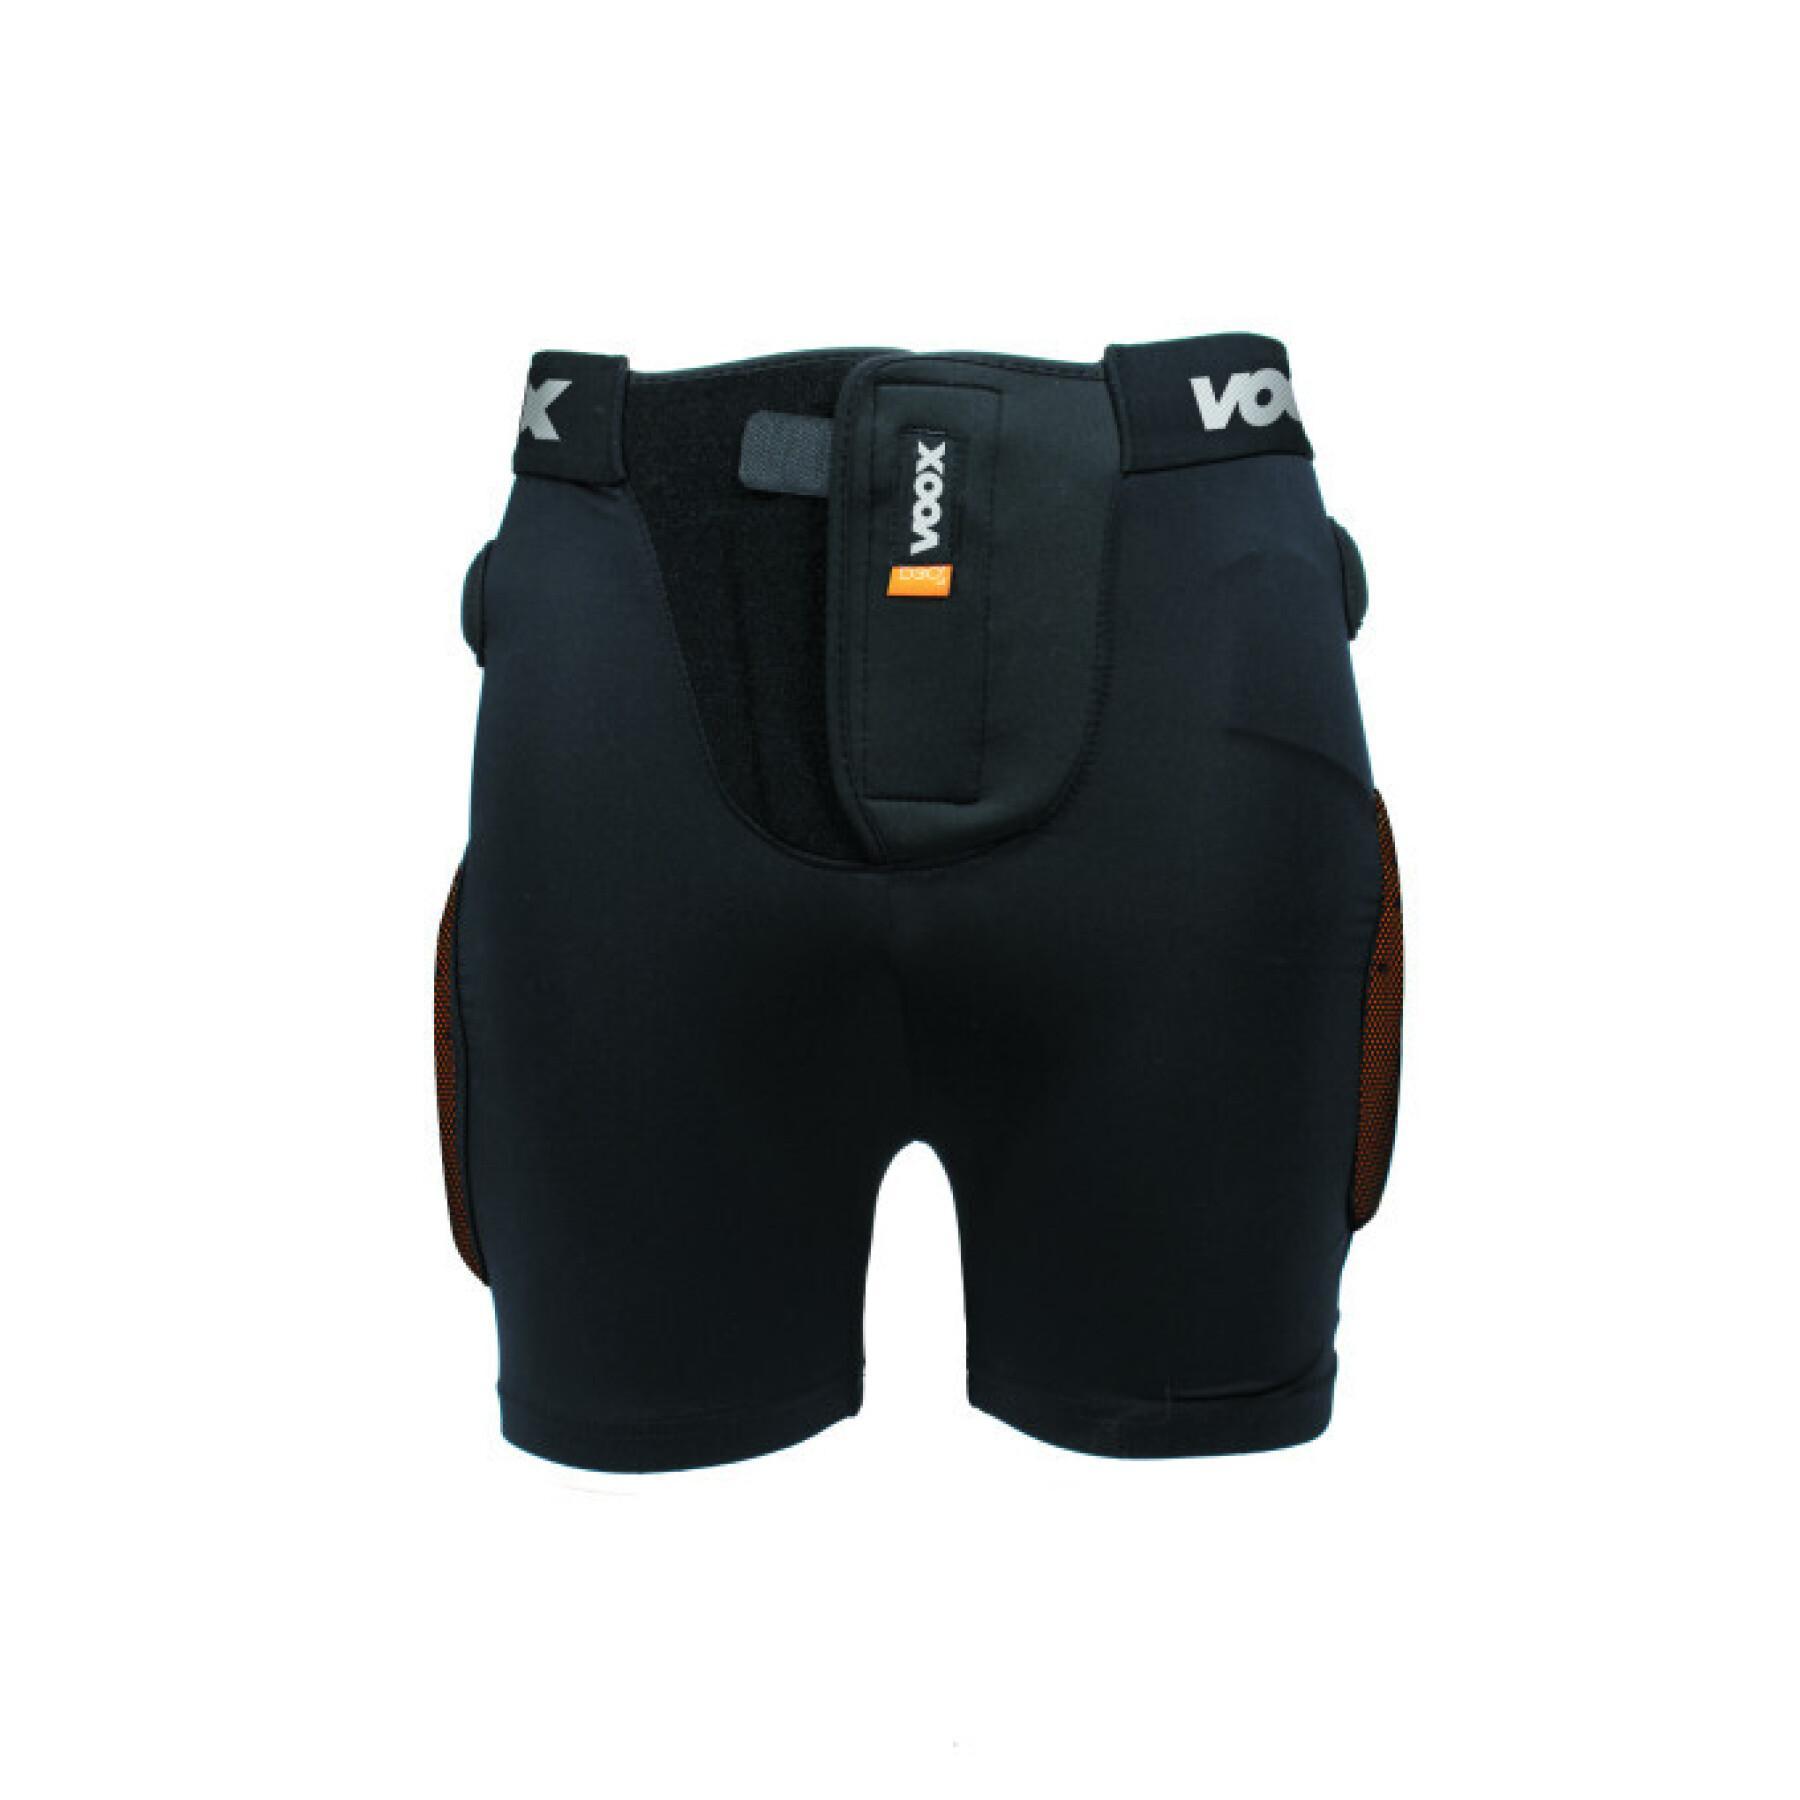 Protective shorts Voox